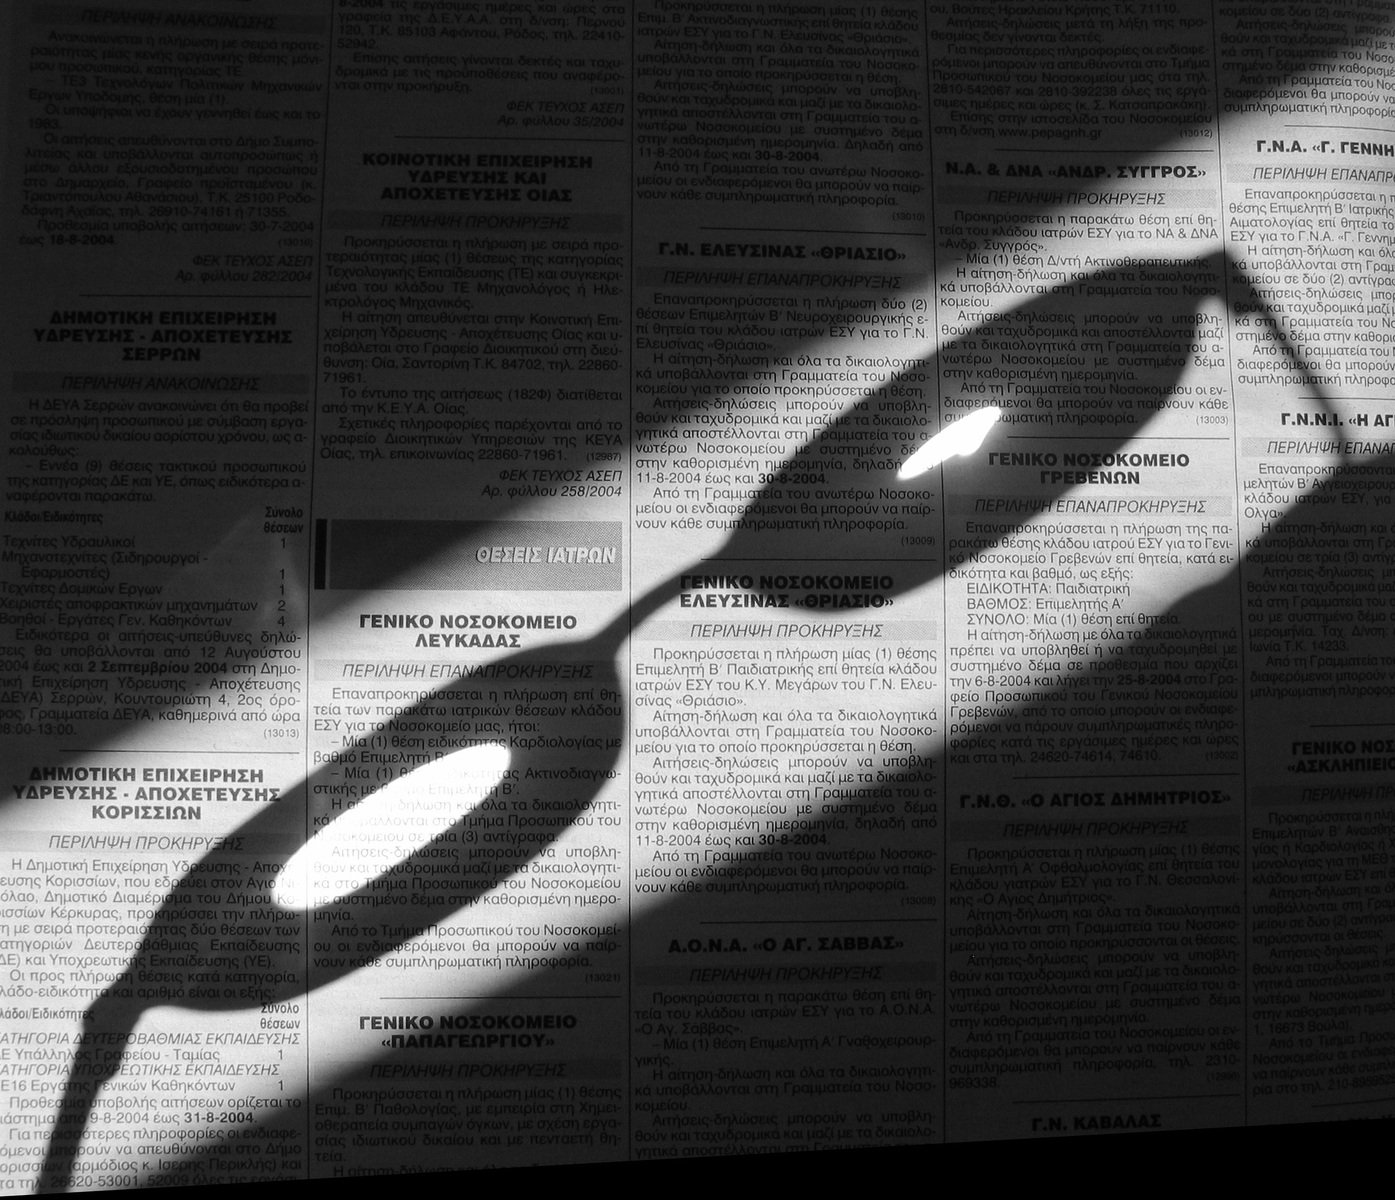 a close up of the shadow of a man's hand on news paper